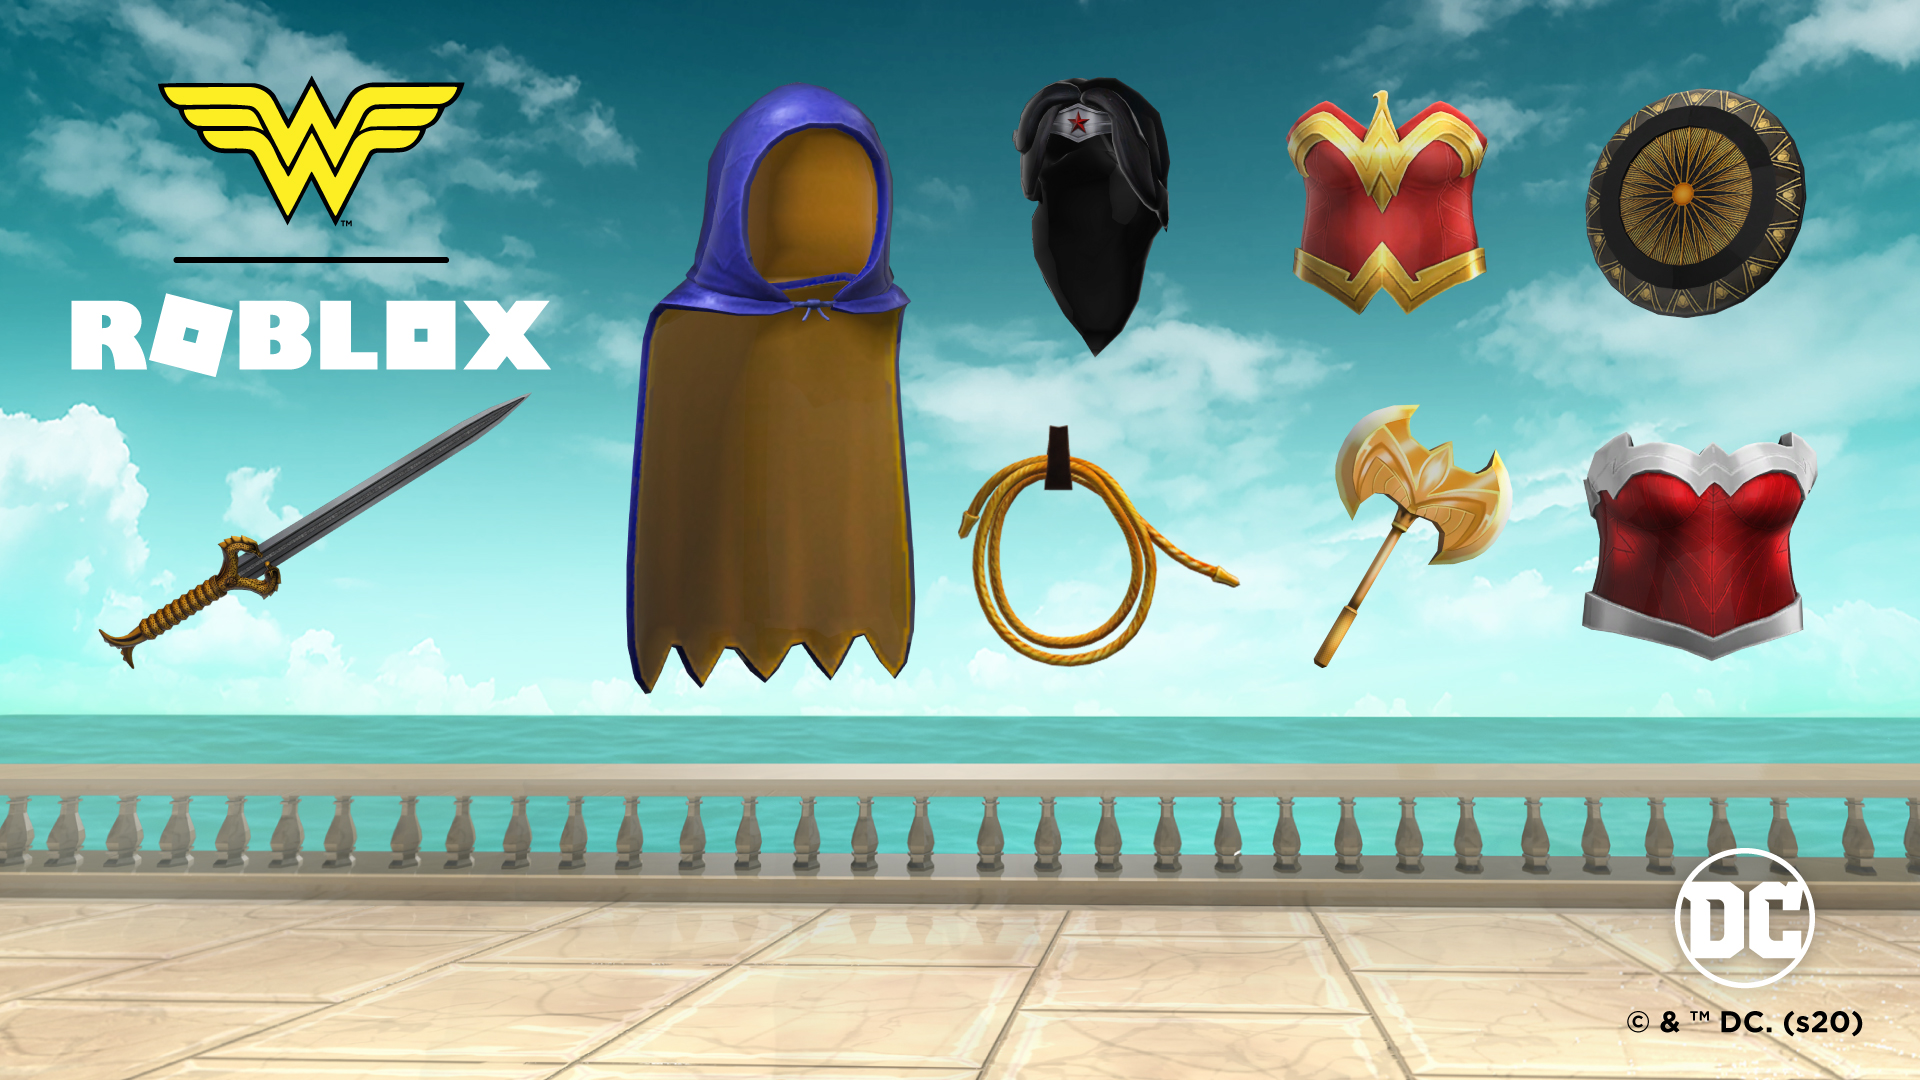 Rbxnews On Twitter Here Are All The Prizes You Can Currently Earn From The Roblox Wonder Woman Game Event Page Https T Co Javmrppsox Blog Post Https T Co Kszycbsyhm Make Sure To Be On The Lookout - rbxcity llc on twitter want to win 6000 robux